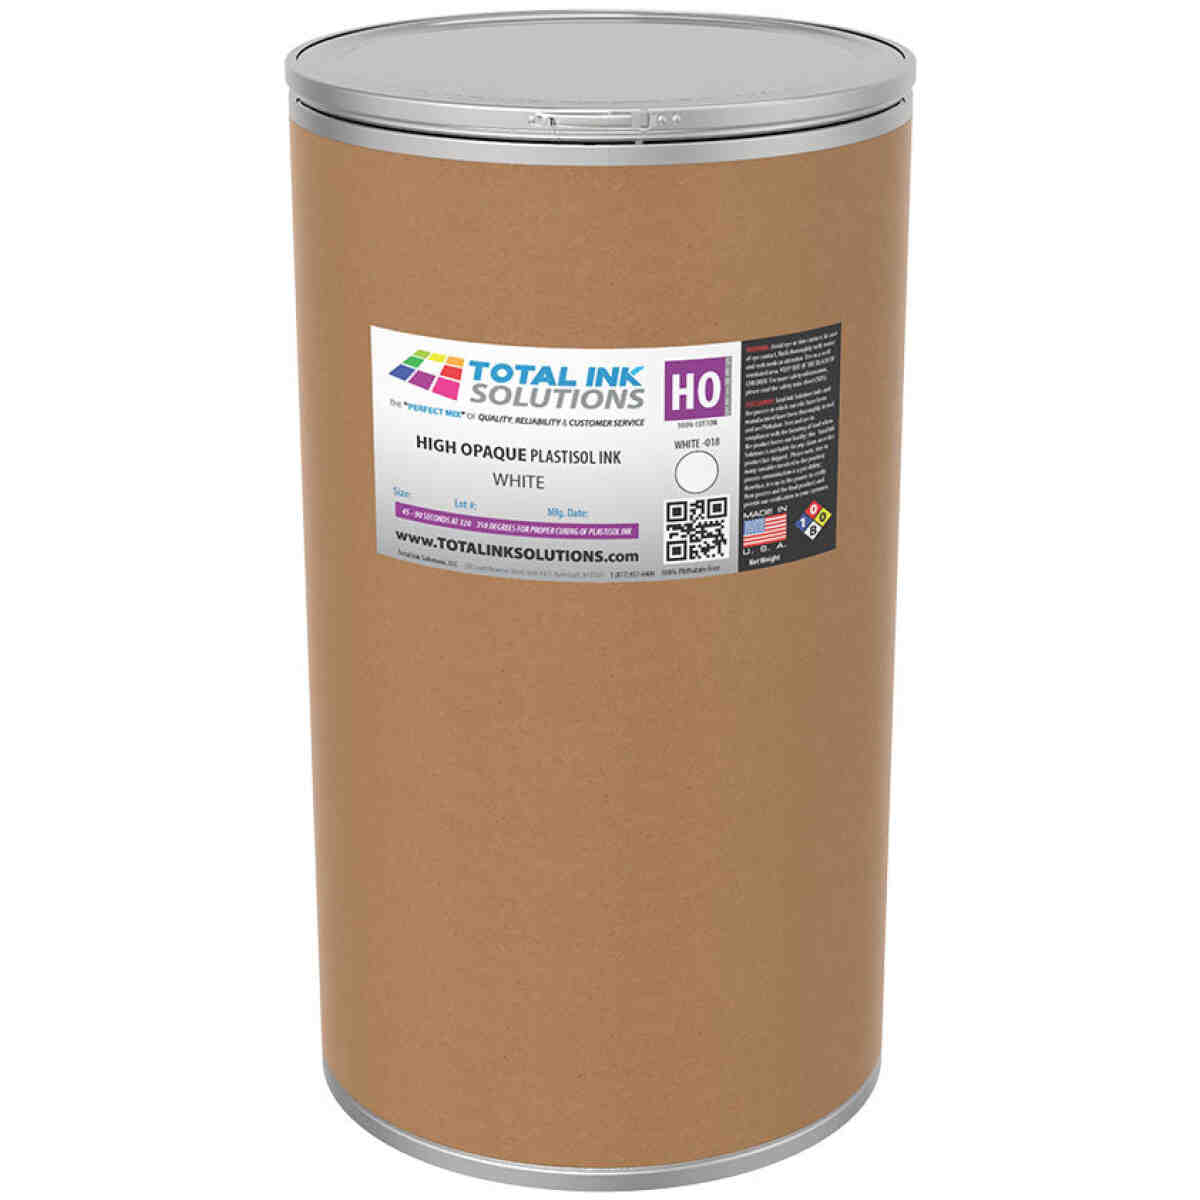 High Opaque Plastisol Ink - White - 55 Gallons TOTAL INK SOLUTIONS®